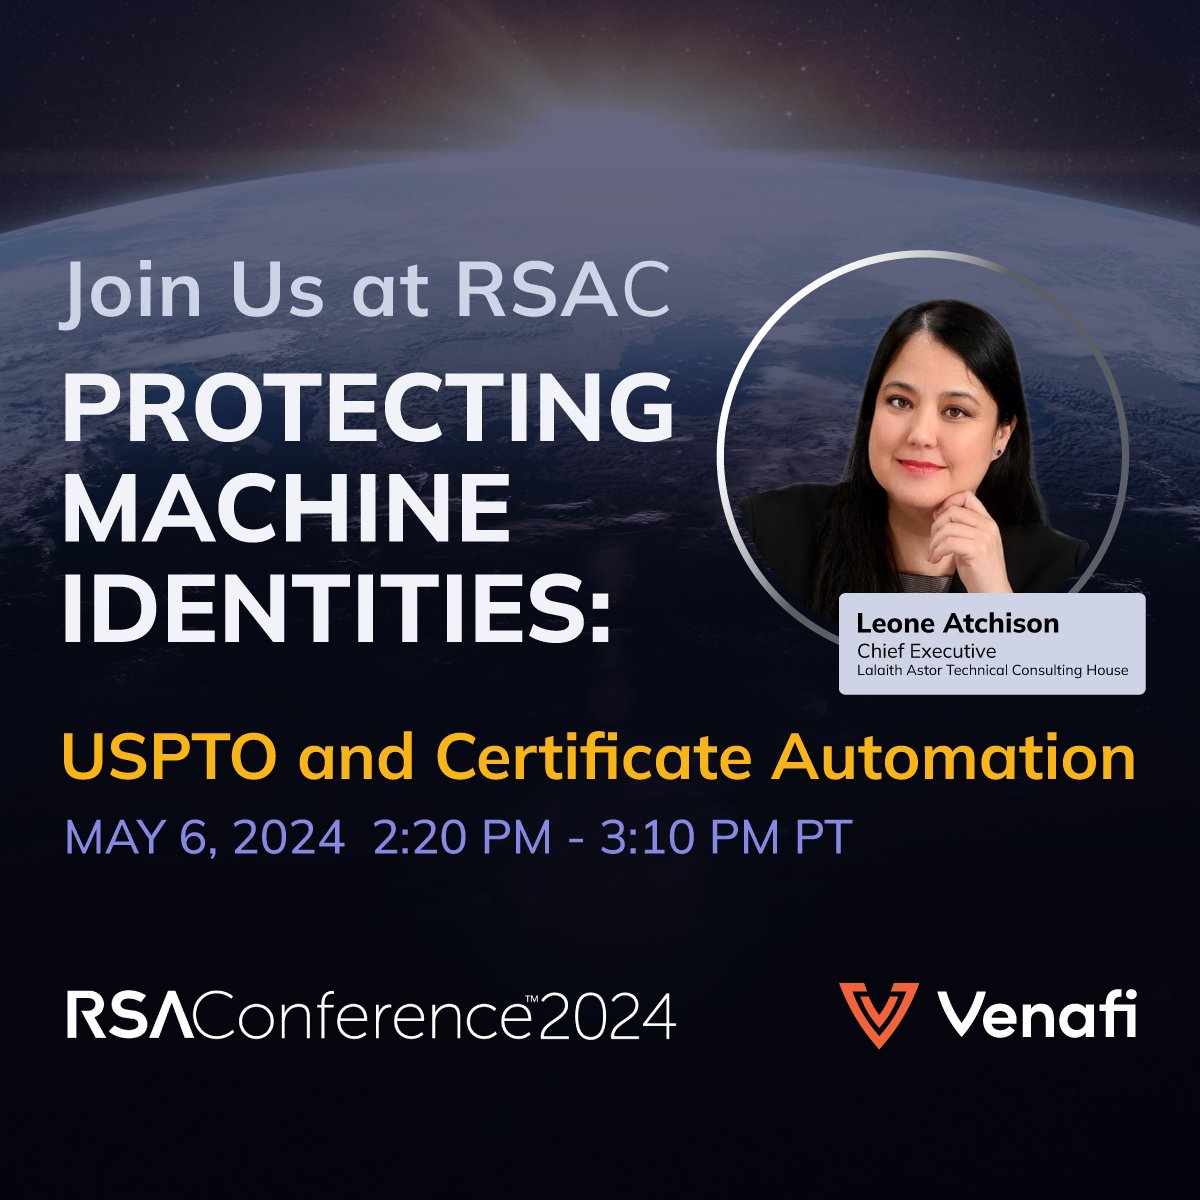 Next Monday at #RSAC 2024, come see us at two incredible events: ✅The 11th annual Public Sector Day by @Carahsoft: carahevents.carahsoft.com/Event/Details/… ✅ Protecting Machine Identities: @uspto and Certificate Automation: rsaconference.com/usa/agenda/ses… Join us! #TransformWithVenafi